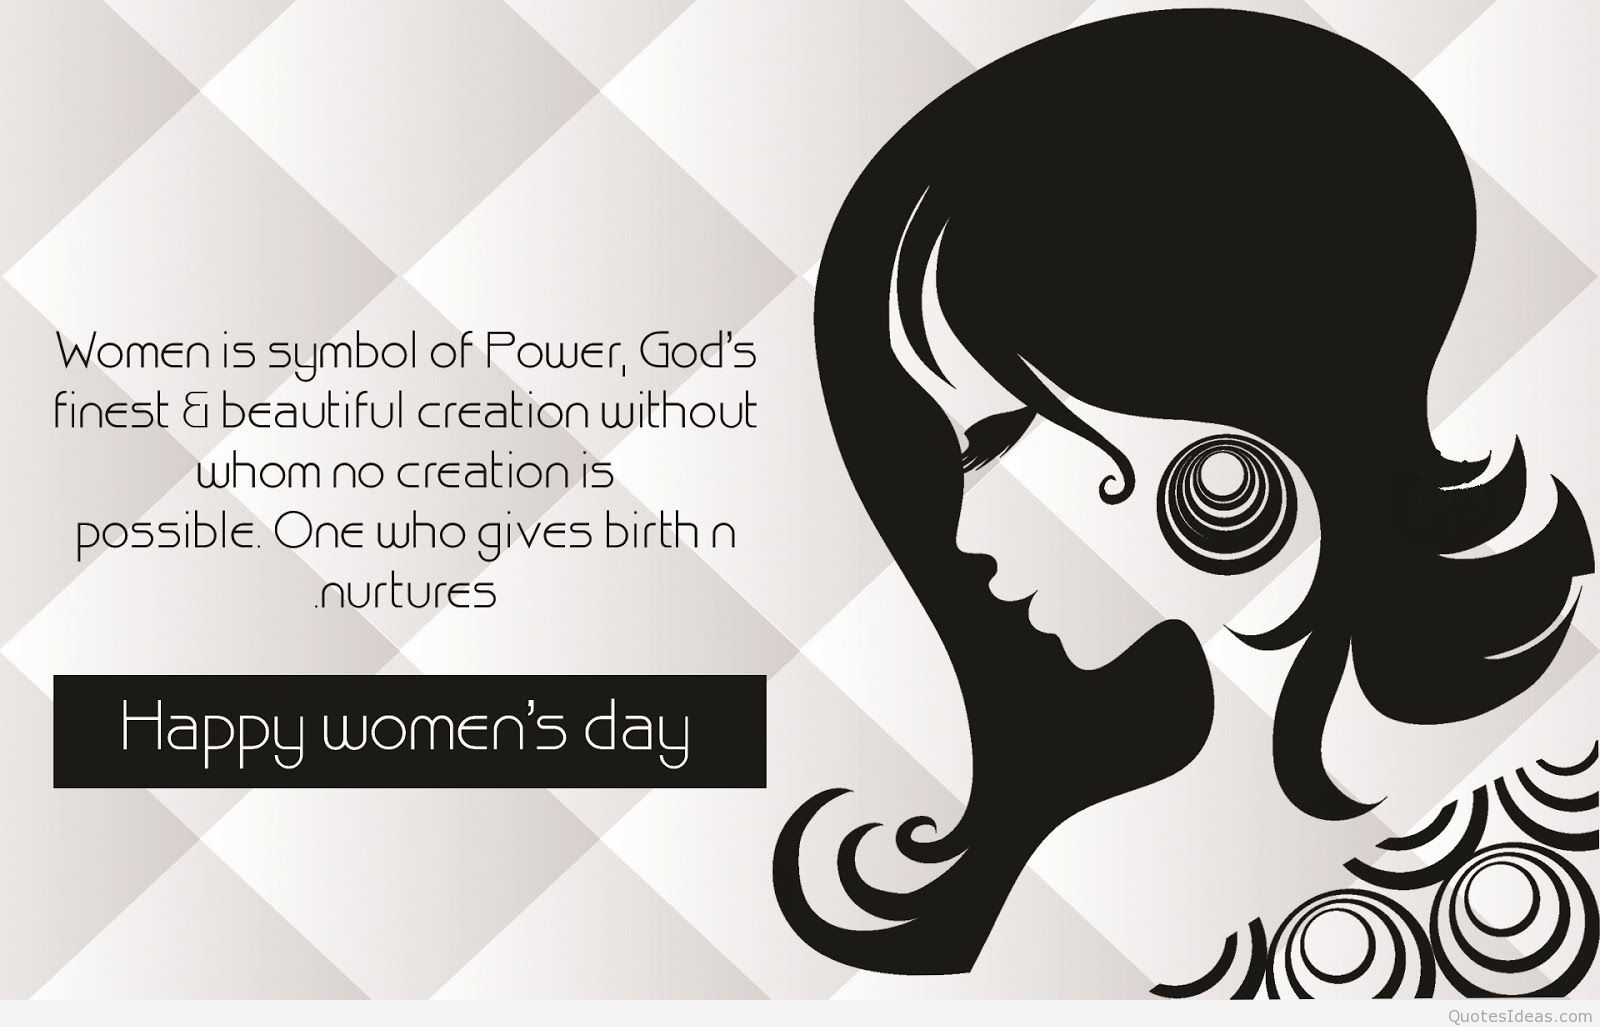 Women's day quotes, image, wallpaper, sayings and wishes